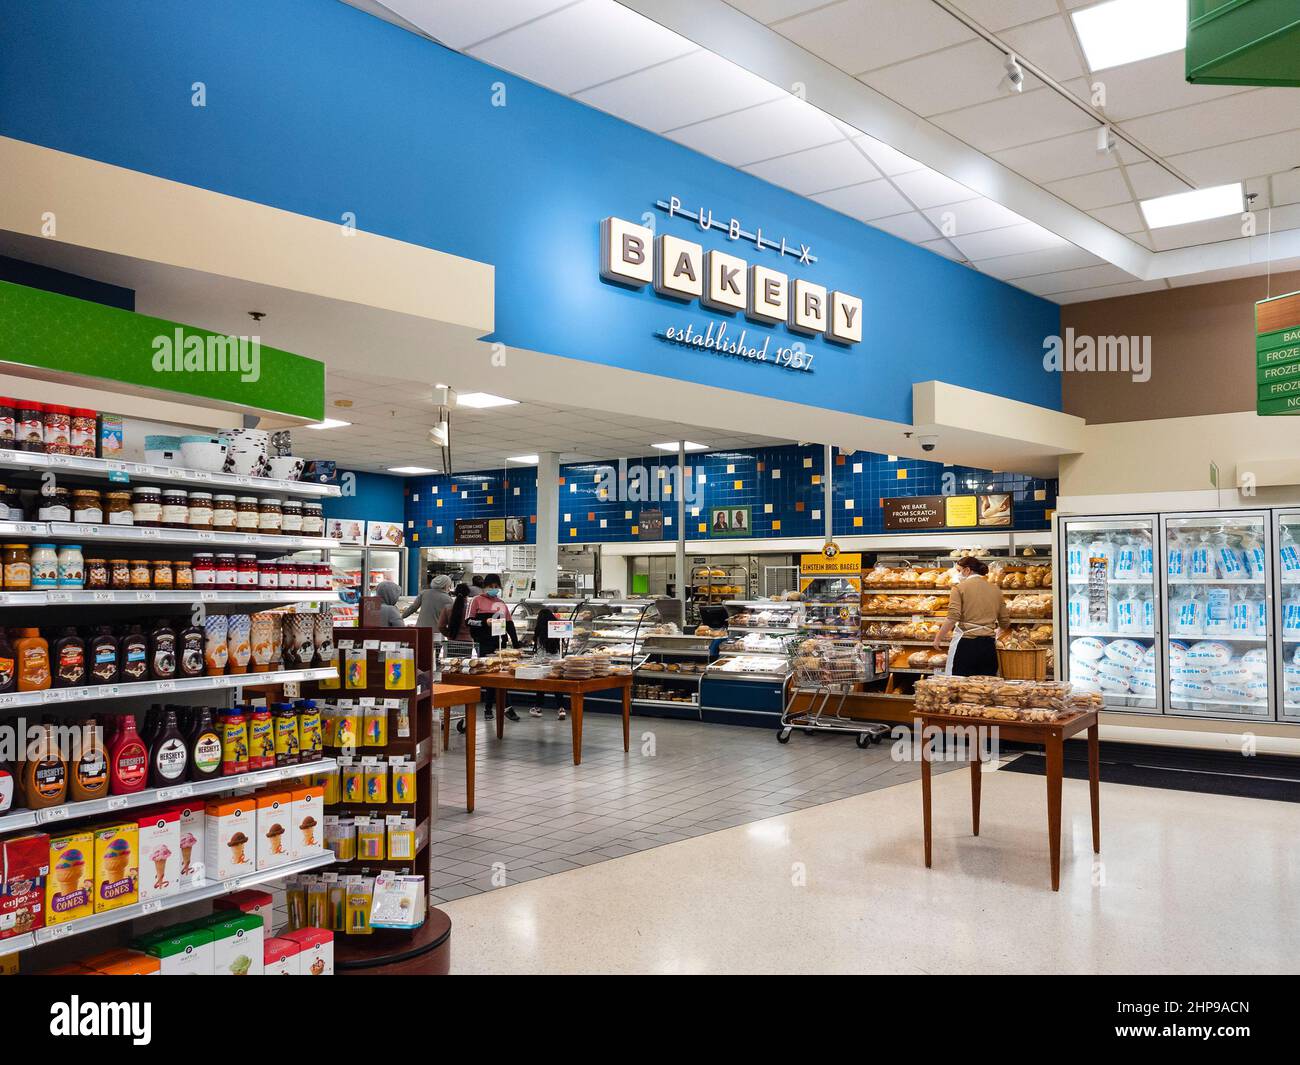 Orlando, Florida - February 8, 2022: Horizontal Indoor View of Publix Bakery with a Store Attendant Stacking Bread. Stock Photo